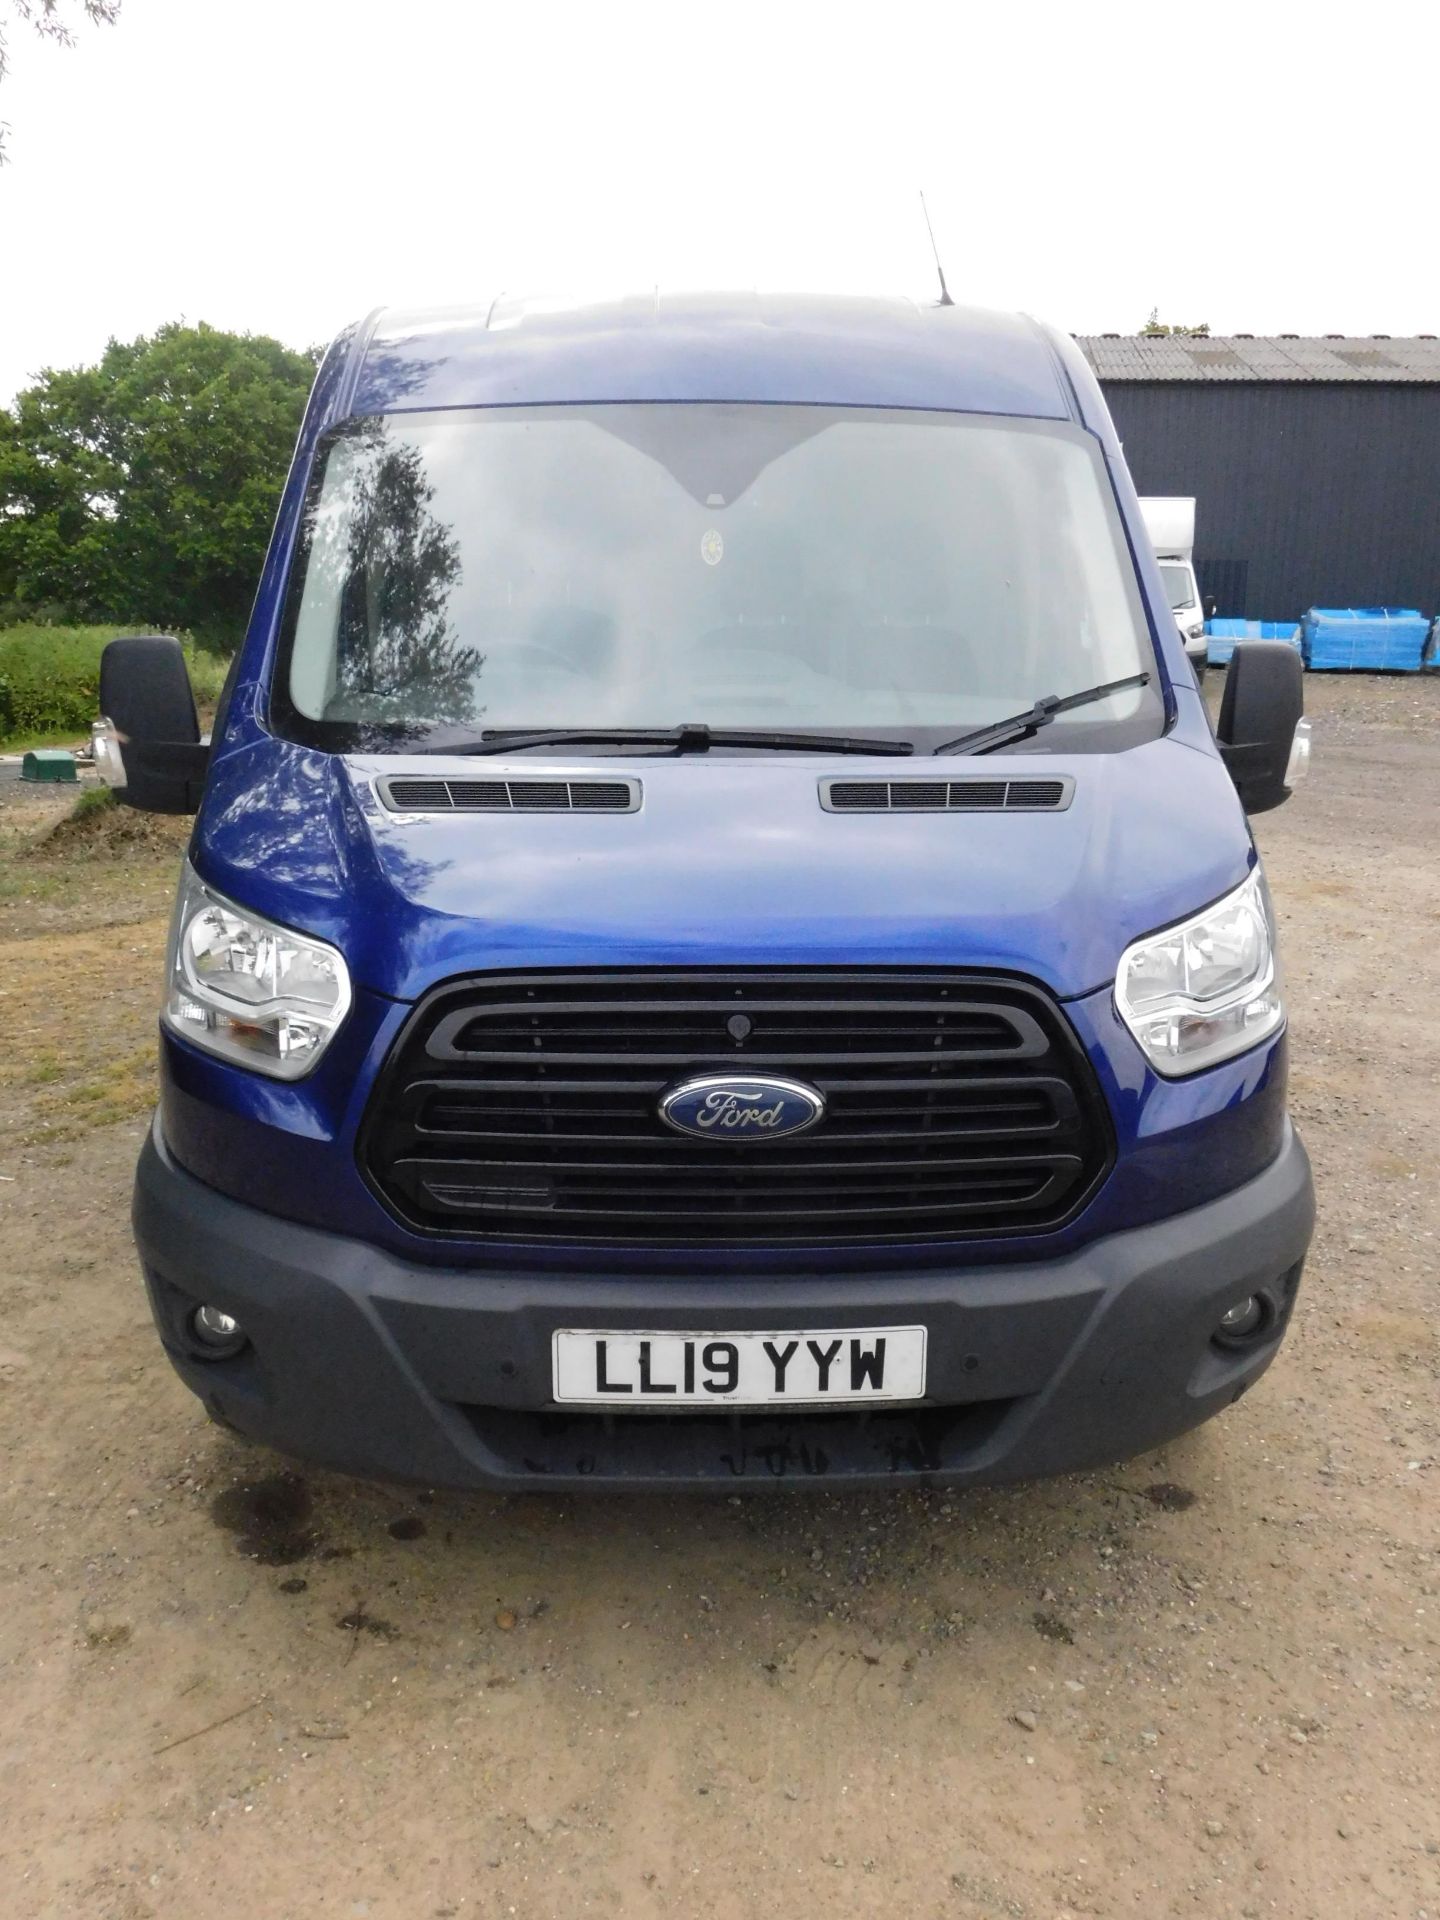 Ford Transit 350 L3 FWD, 2.0 Tdci 170ps H2 Van Auto, Registration LL19 YYW, First Registered 30th - Image 2 of 21